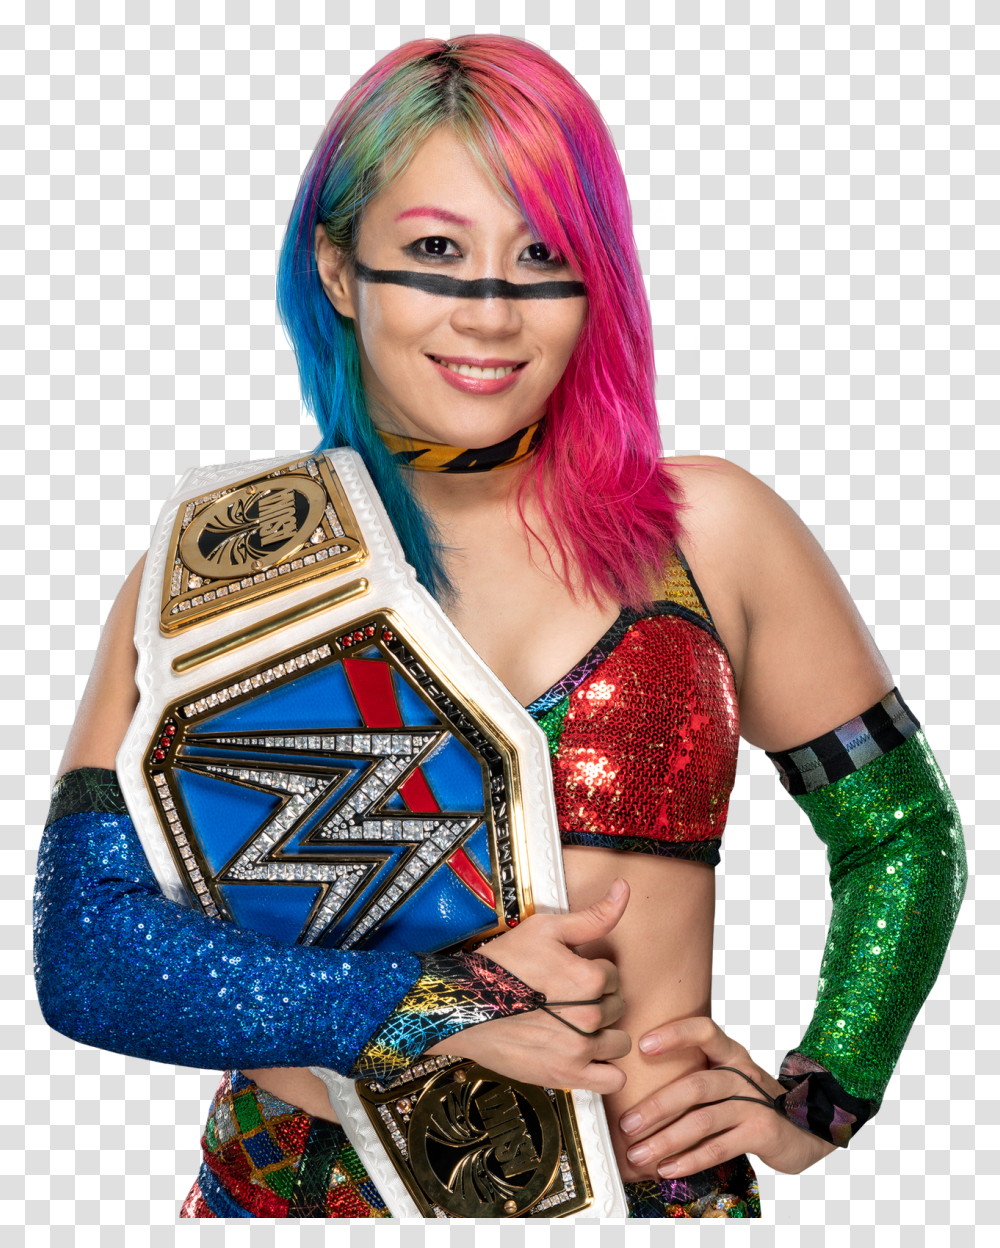 Asuka Wwe Smackdown Women's Championship, Costume, Person, Human, Cosplay Transparent Png